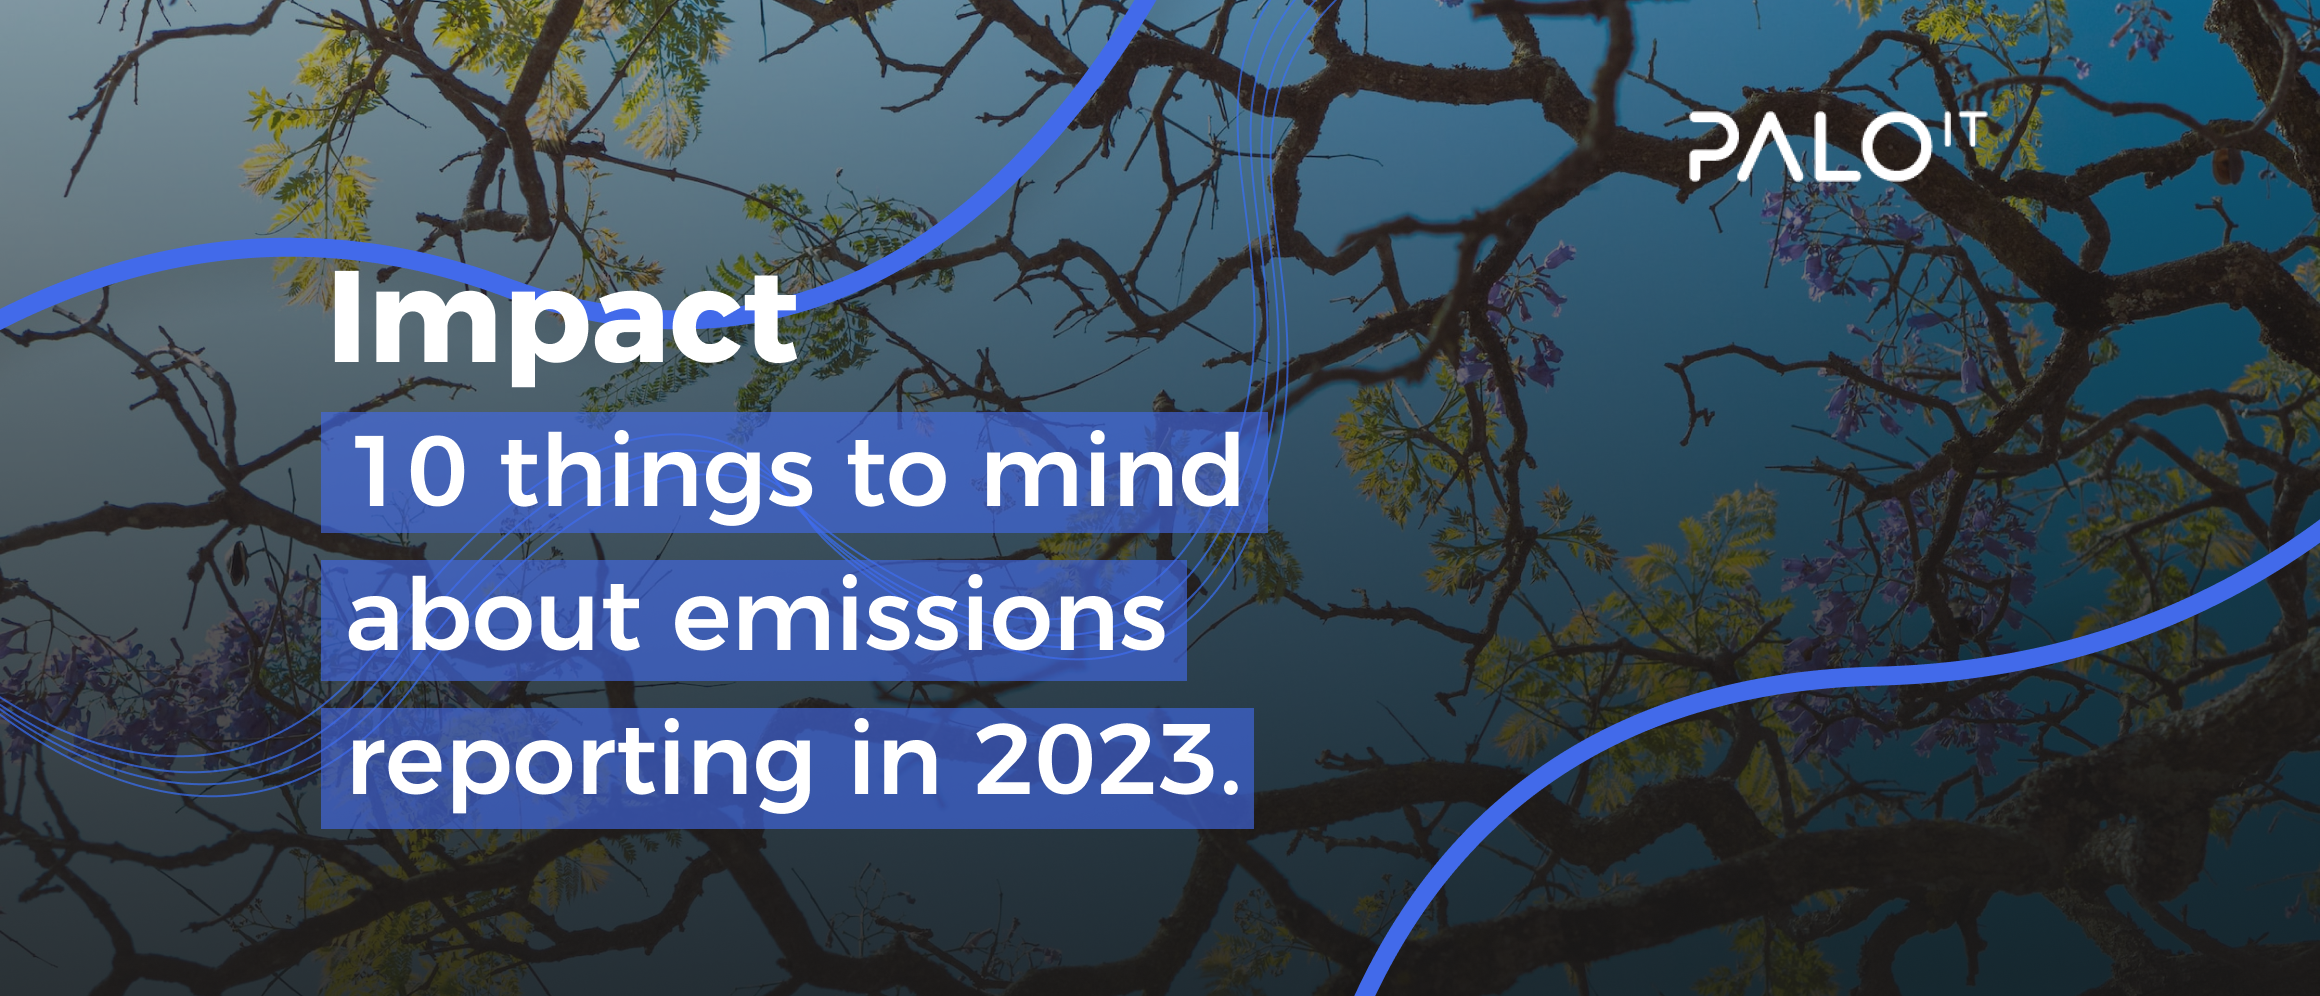 10 things to mind about emissions reporting in 2023